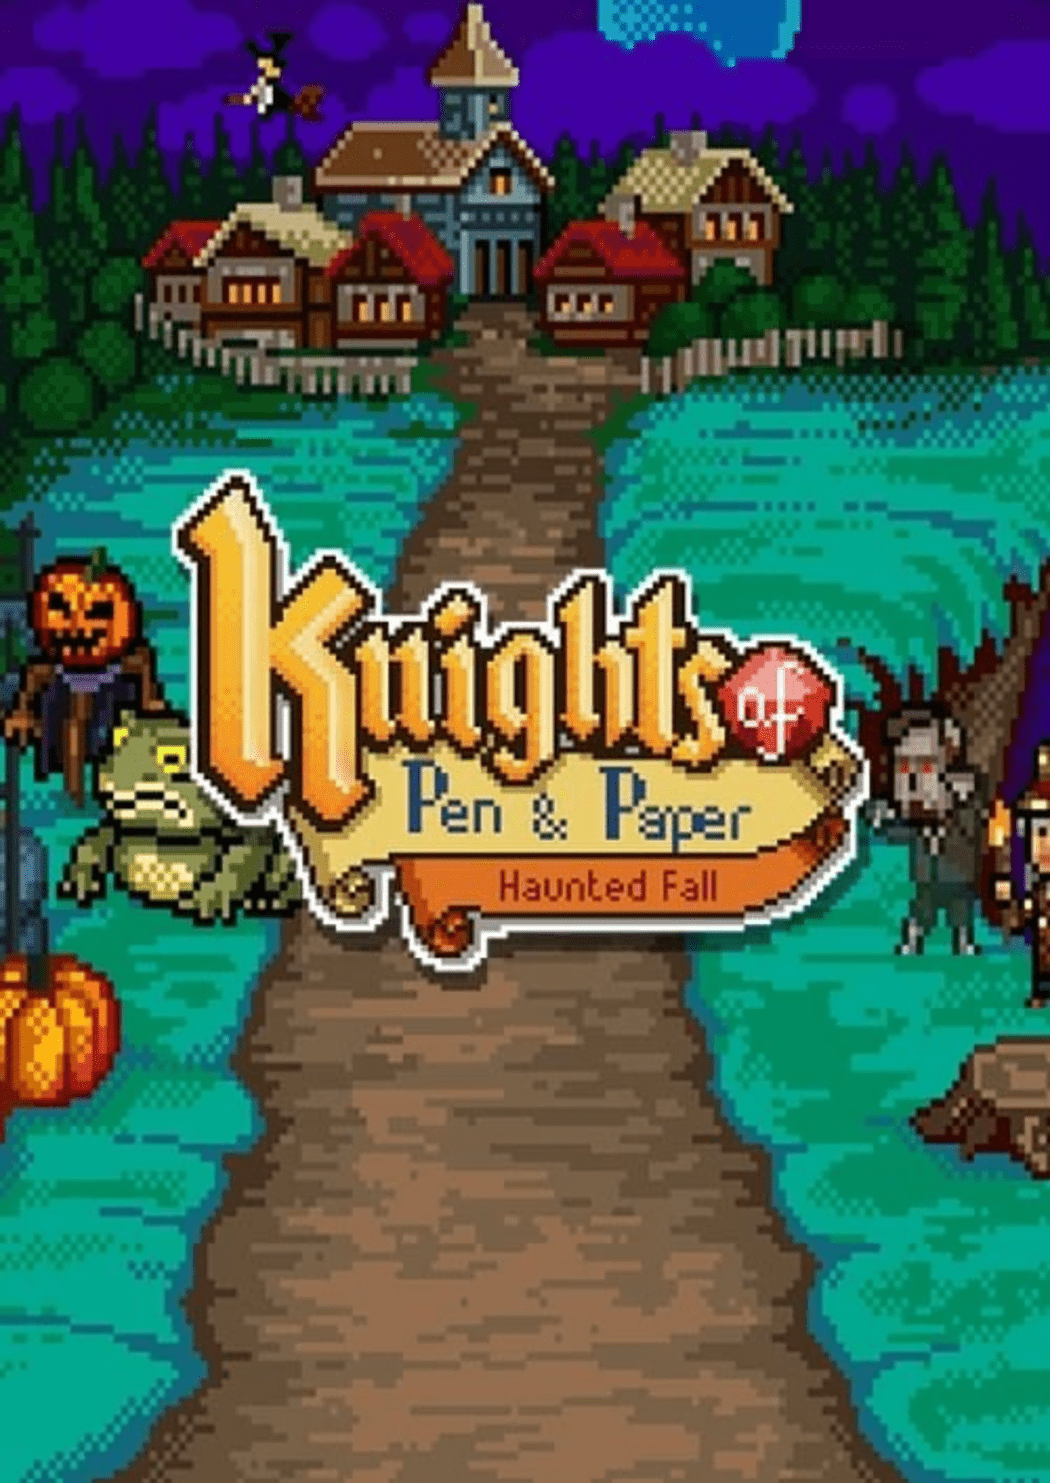 Knights of Pen and Paper - Haunted Fall DLC (PC / Mac / Linux) - Steam - Digital Code